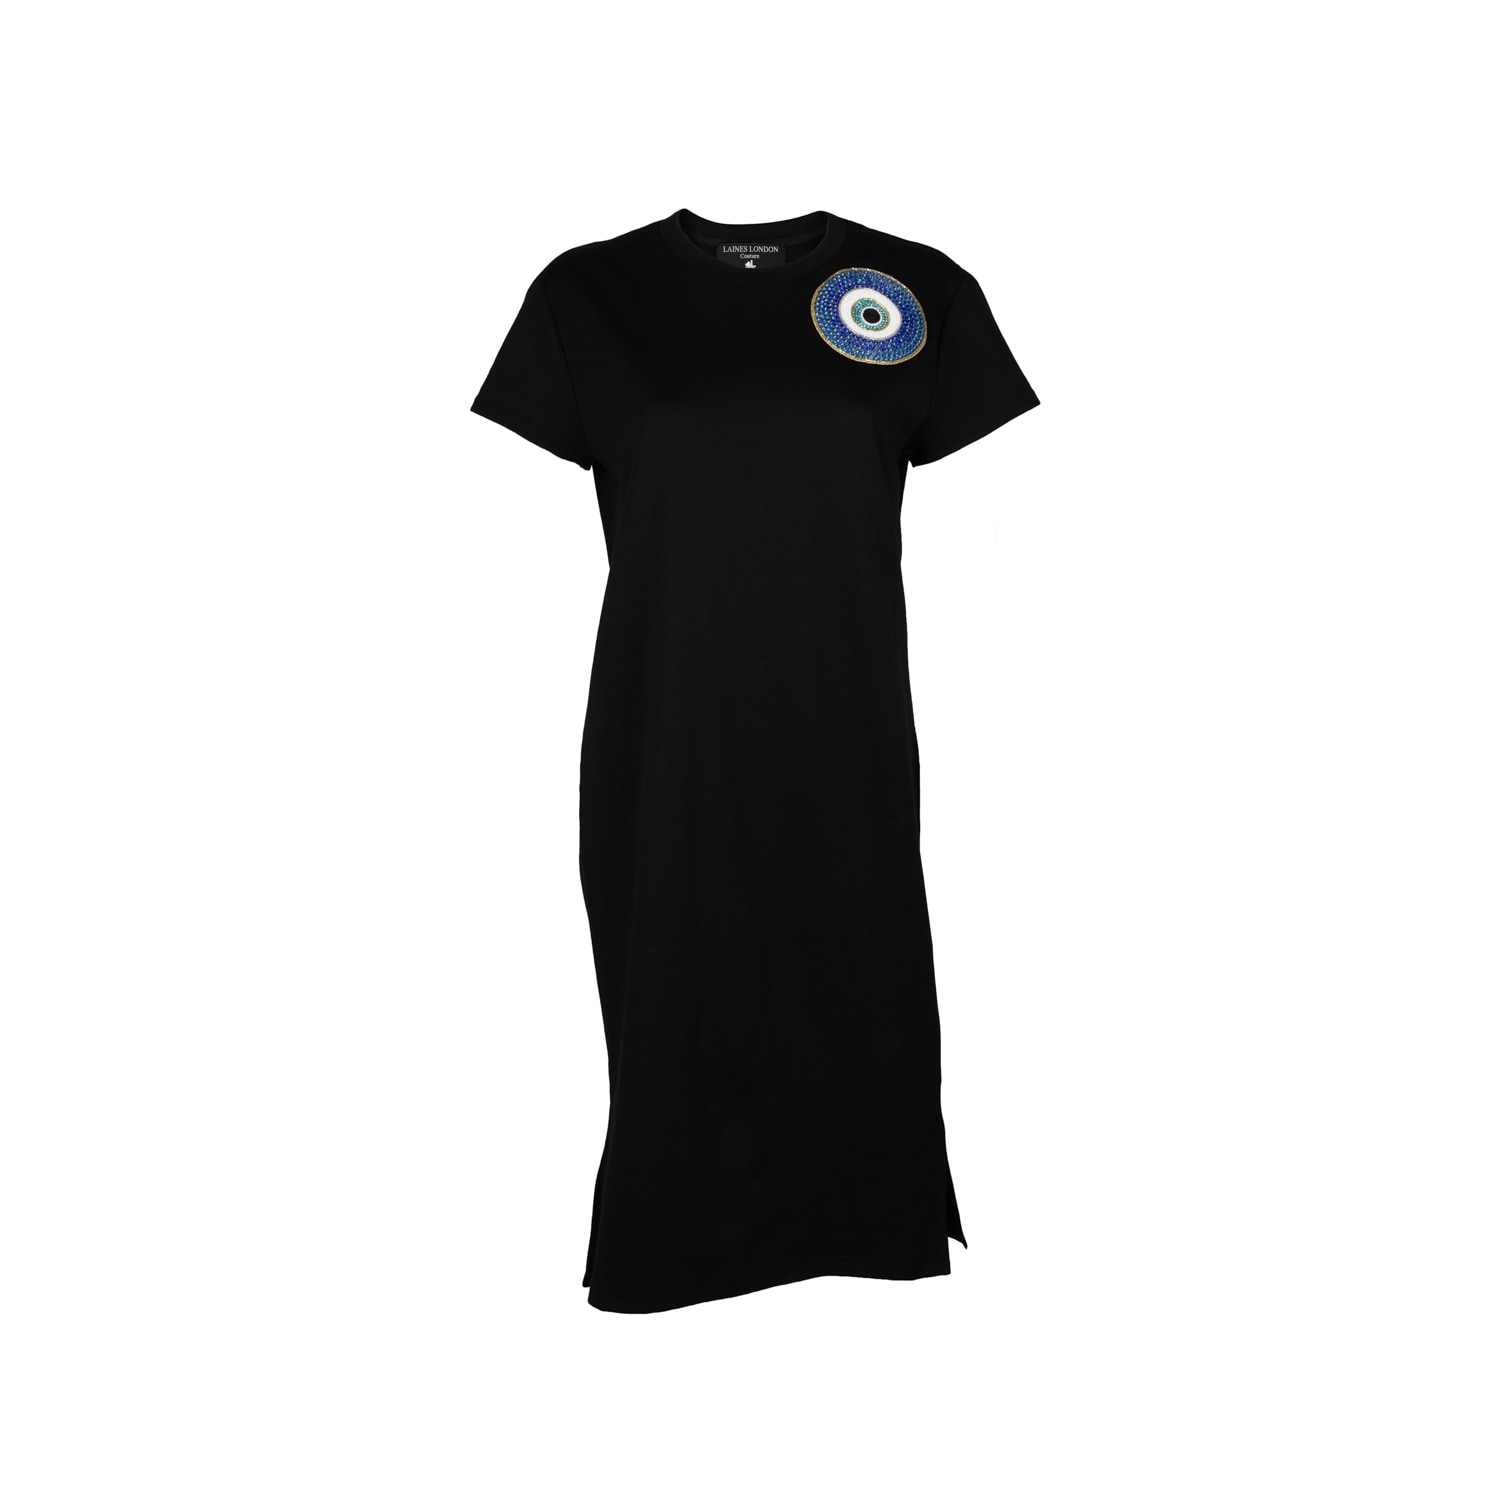 Laines London Women's Laines Couture T-shirt Dress With Embellished Evil Eye - Black